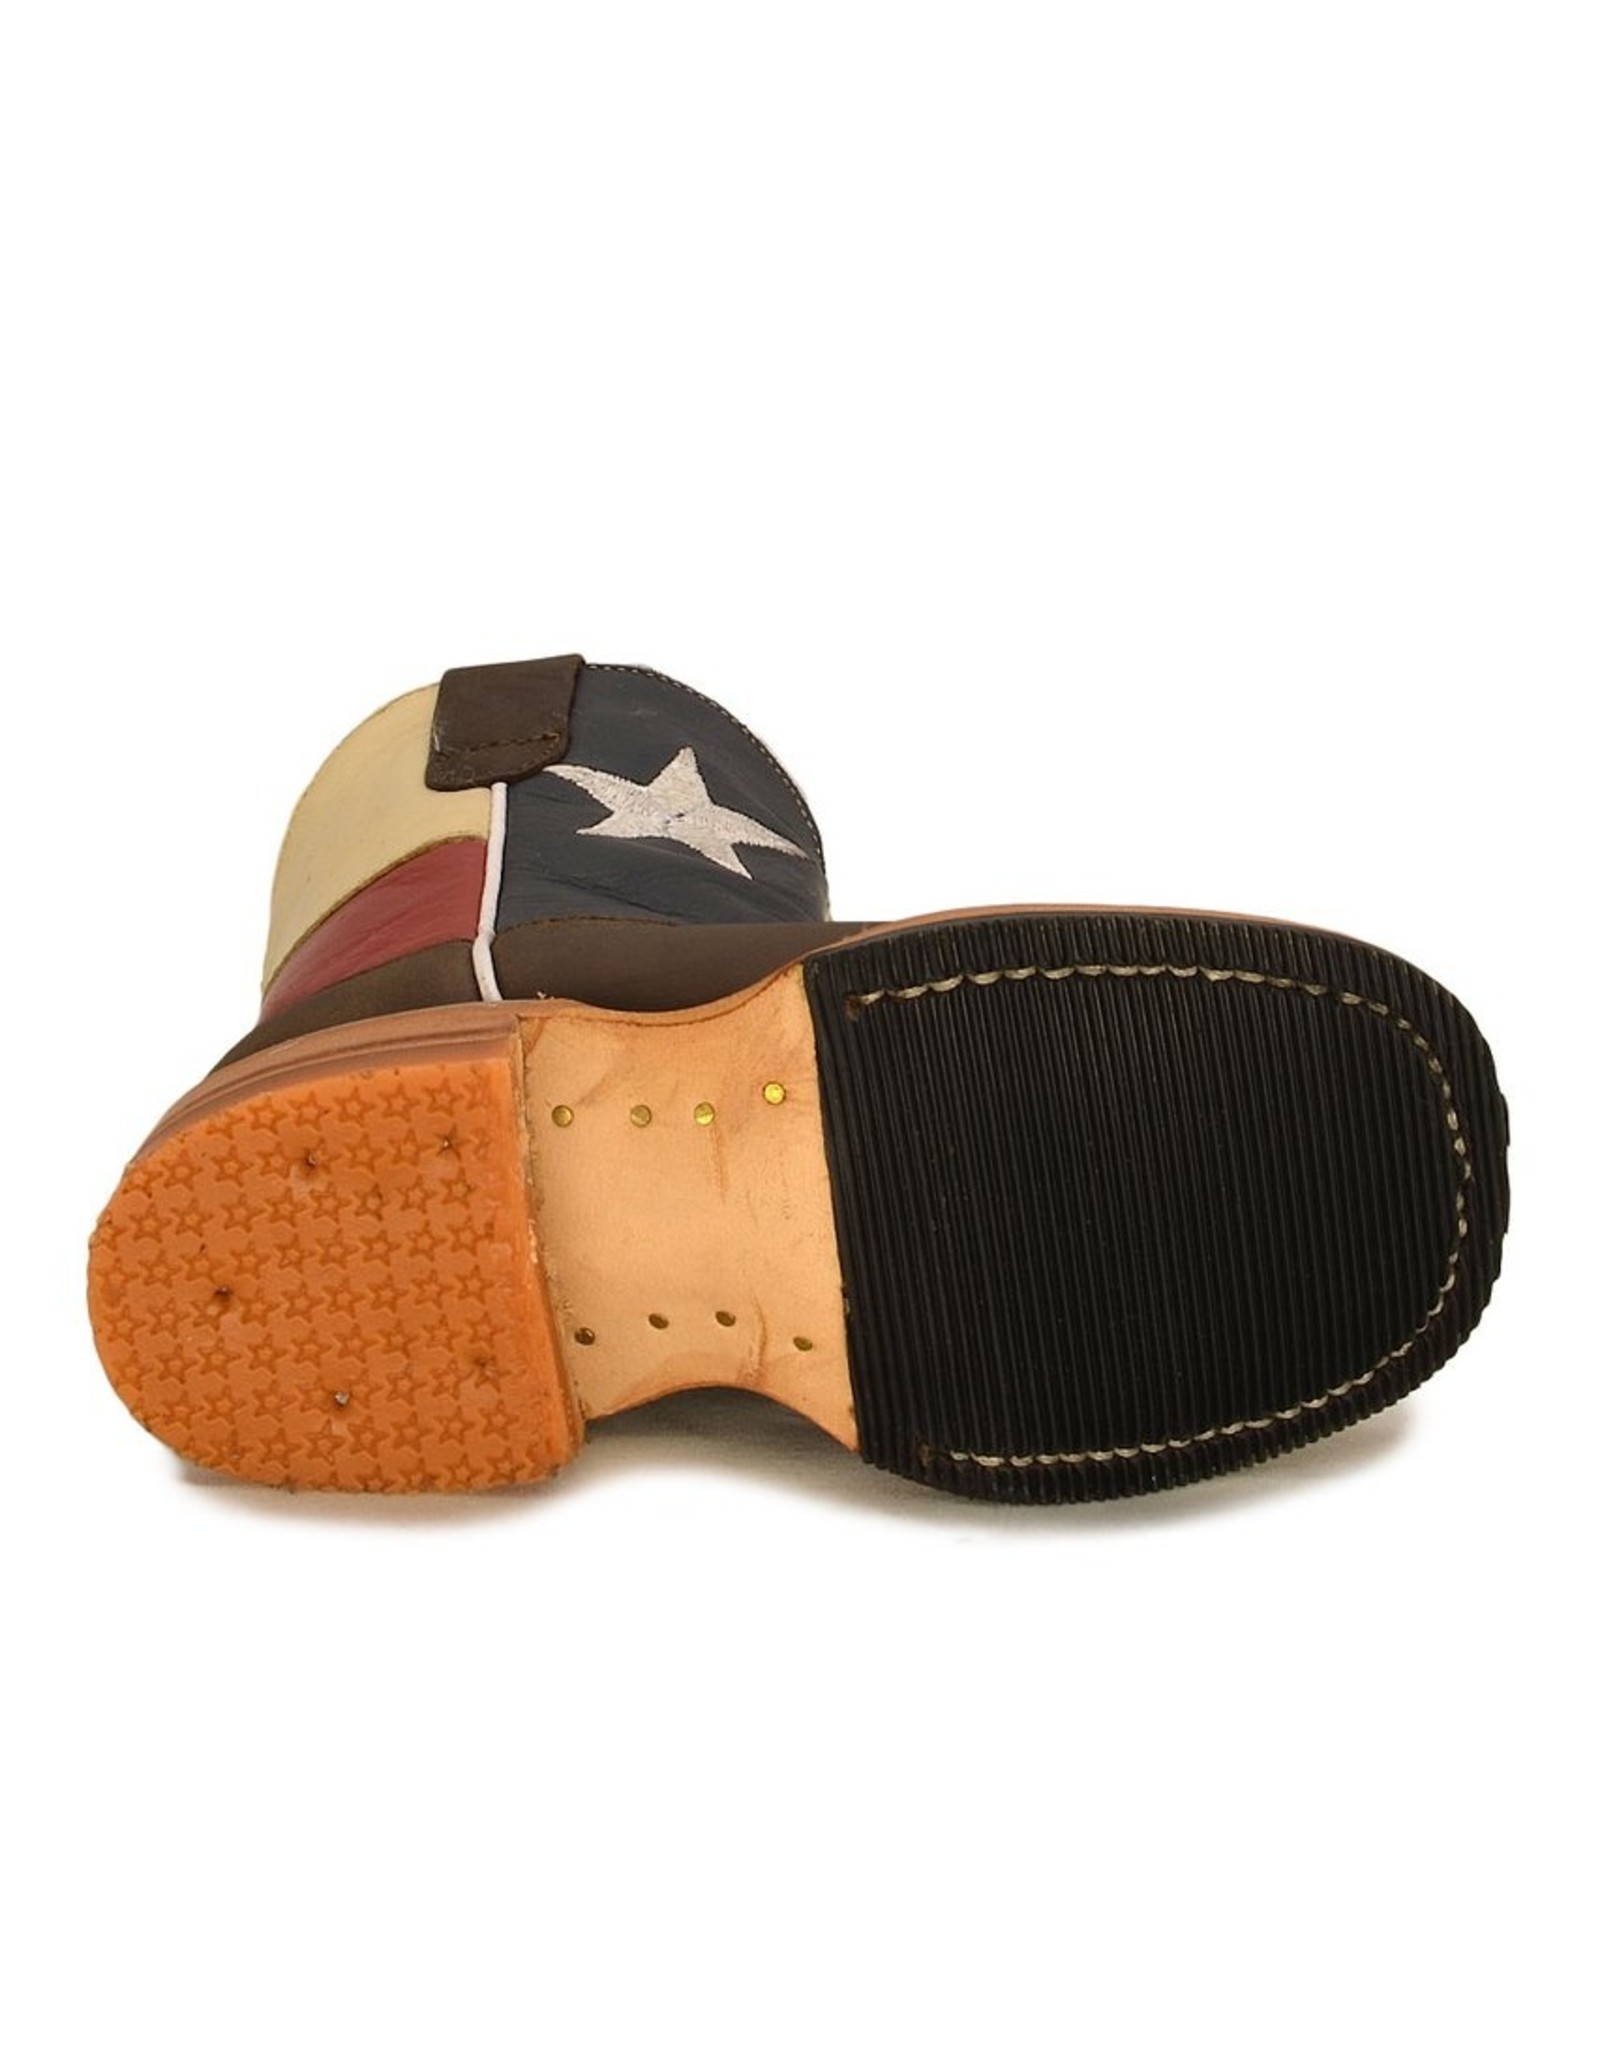 Kids Texas Flag Leather Boots